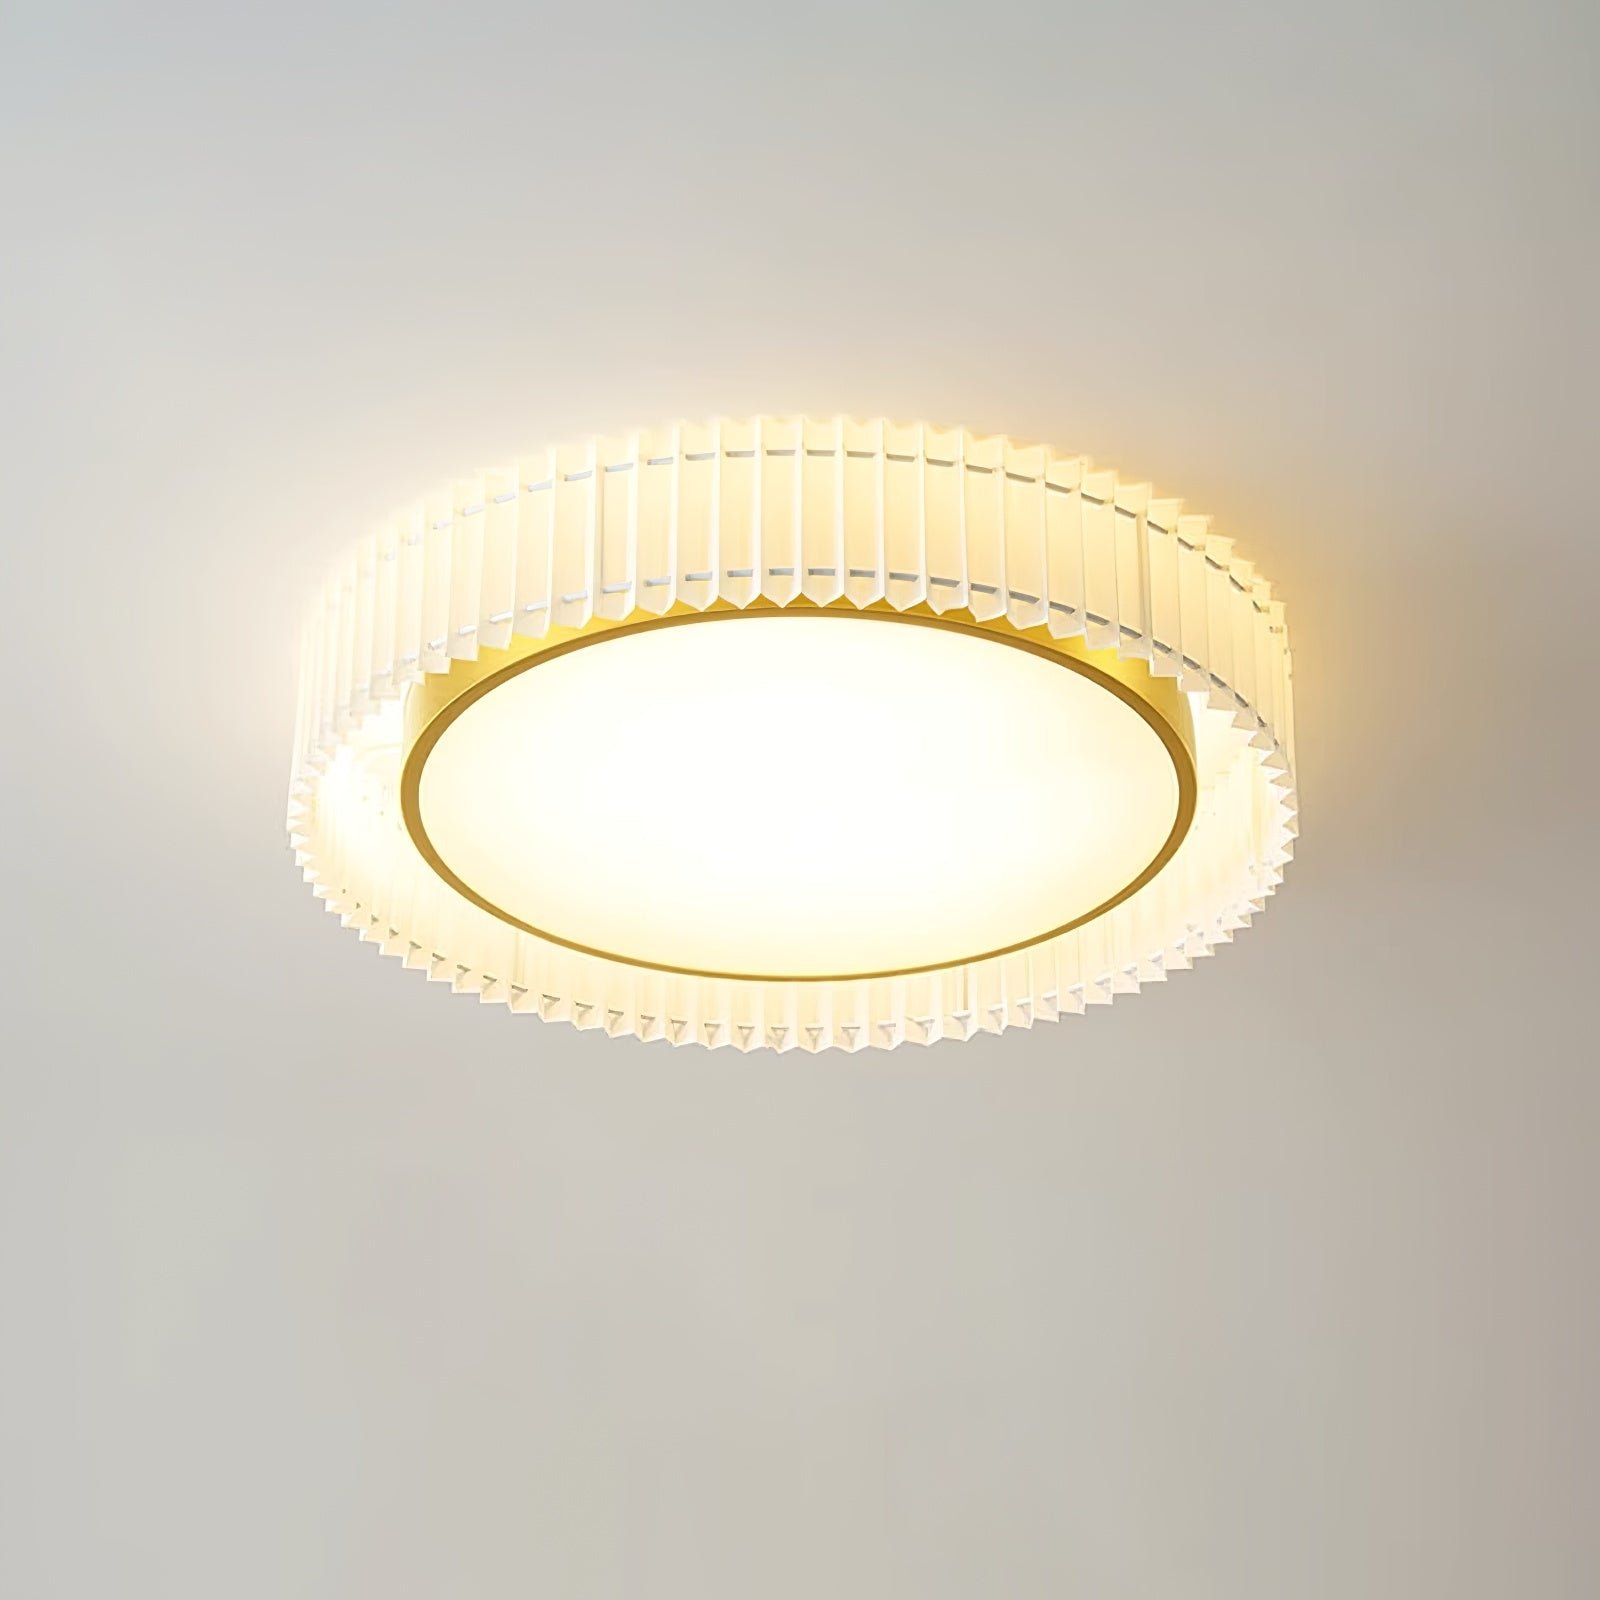 Round Pleated Ceiling Lamp in Gold Beige with Cool White Lighting, Size ∅ 15.7″ x H 7.8″ (40cm x 20cm)